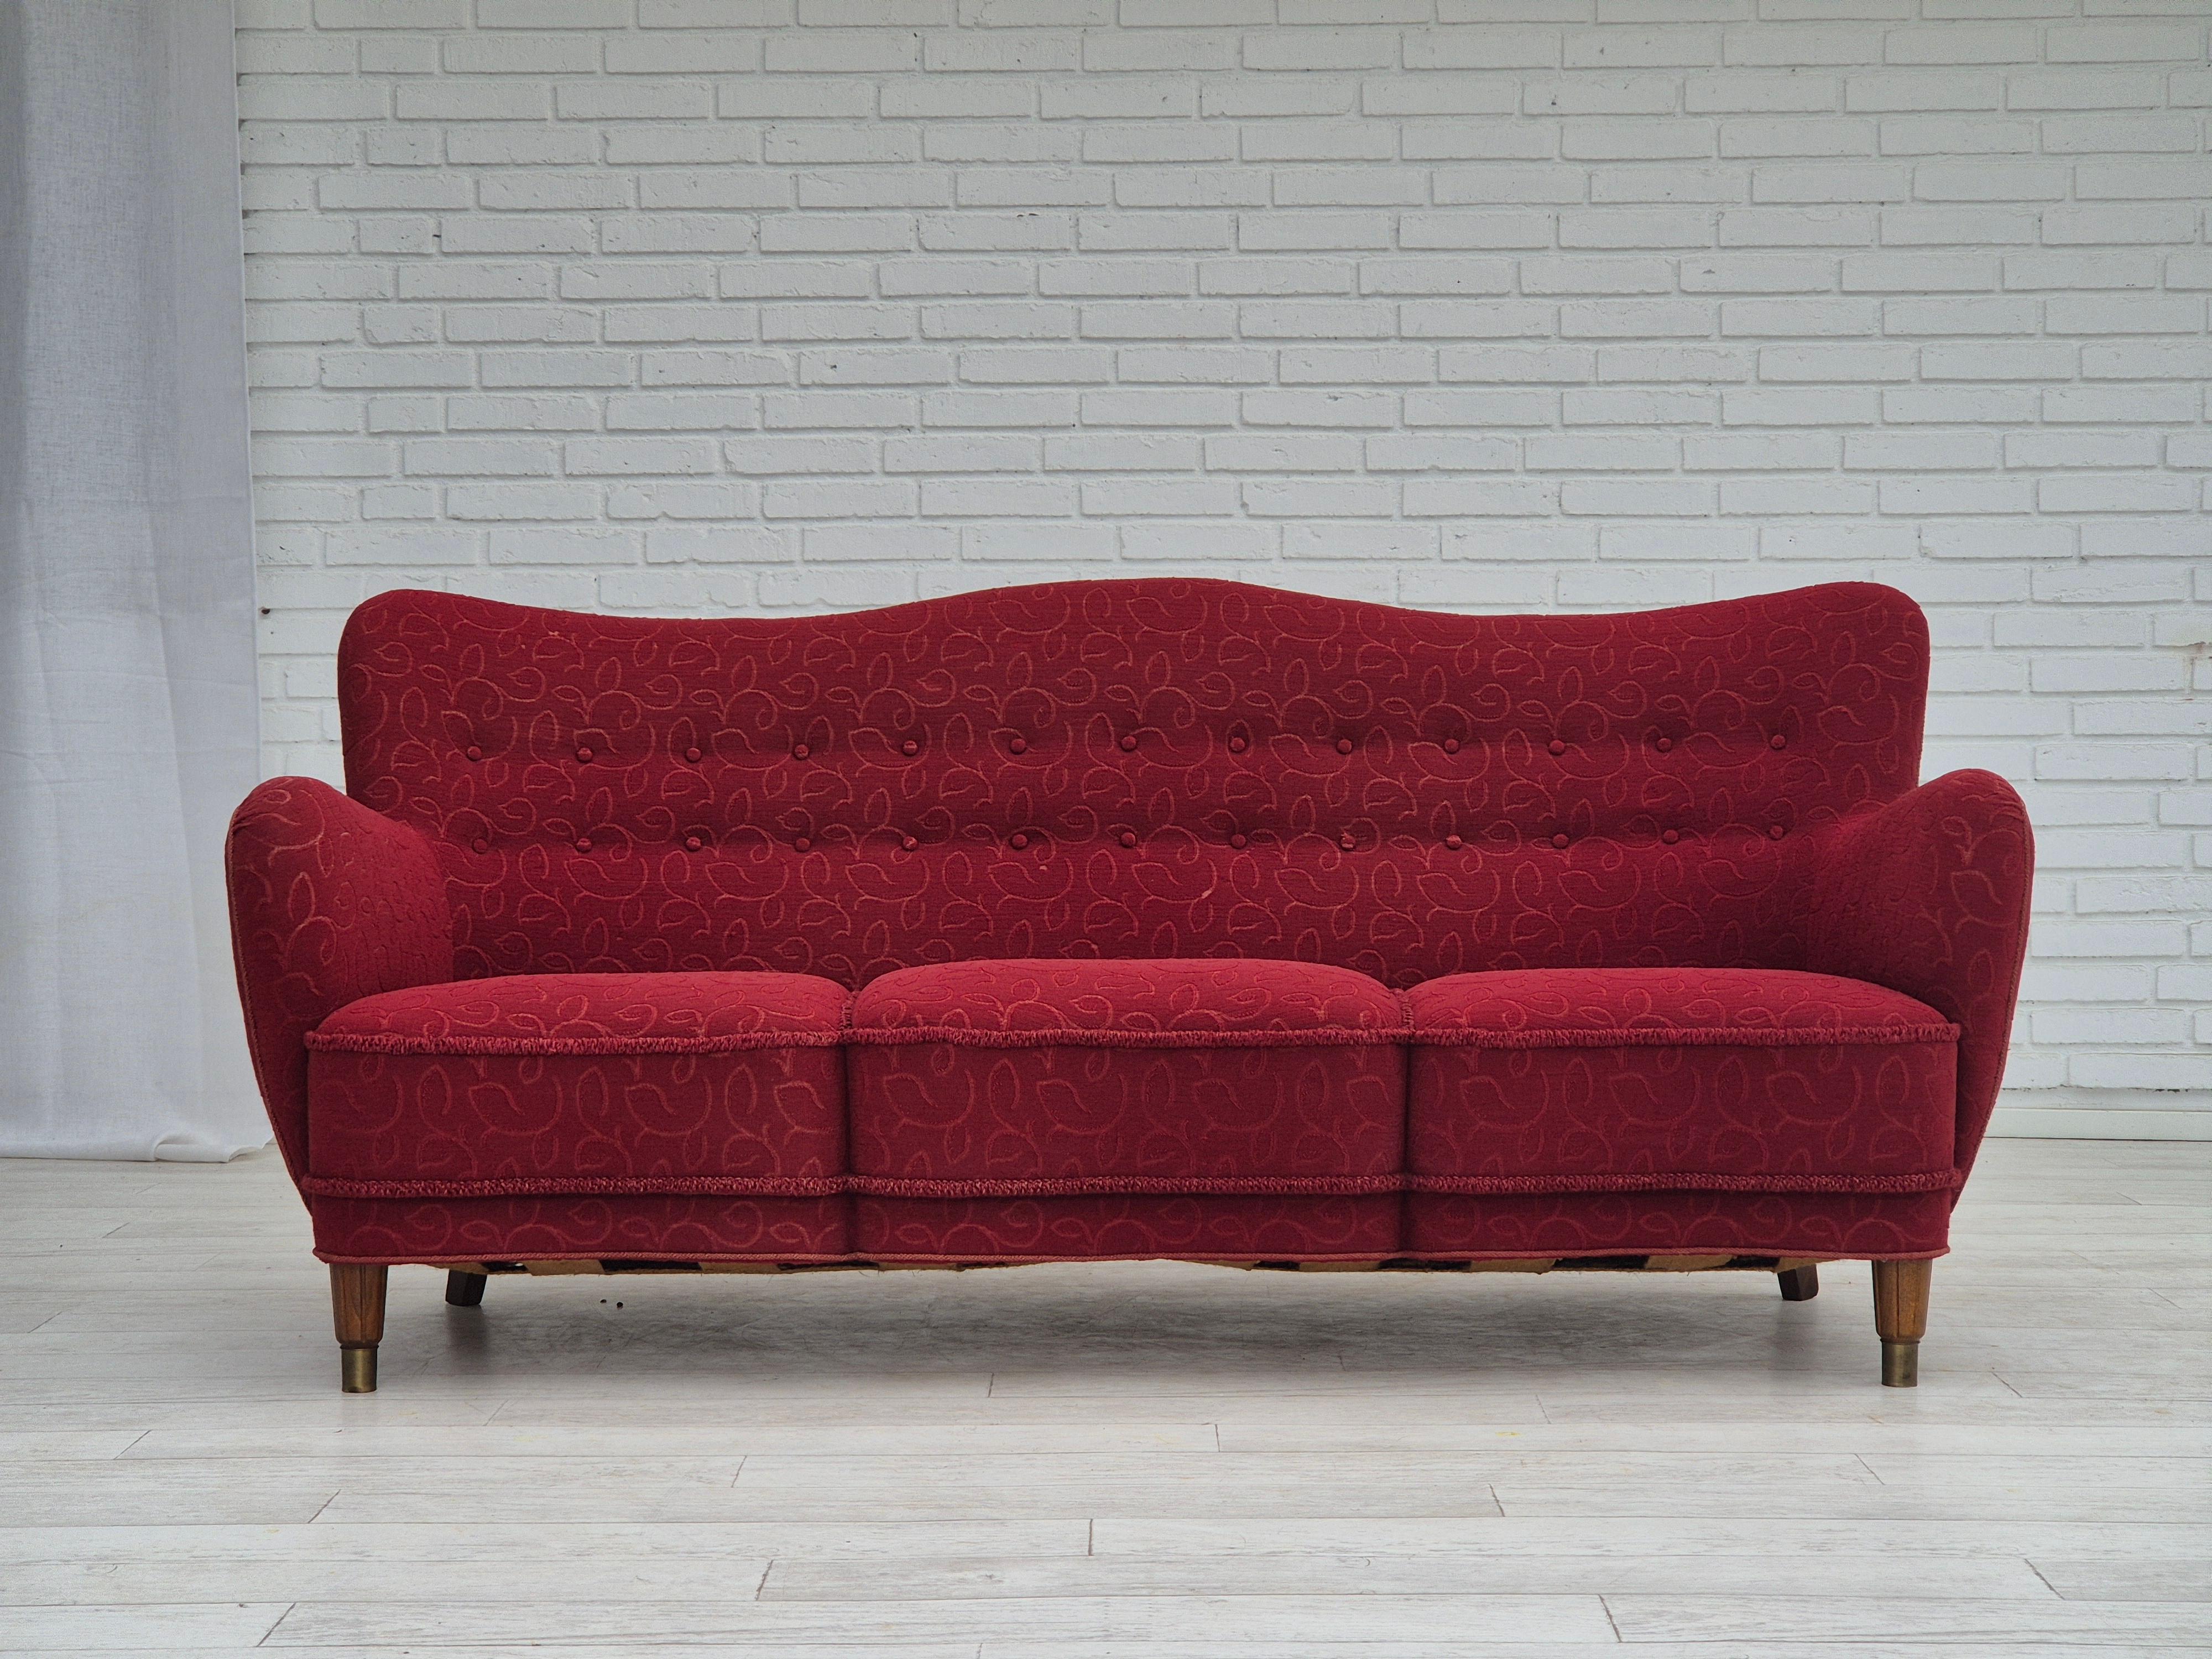 1960s, Danish 3 seater sofa in original very good condition: no smells and no stains. Original red cotton-wool furniture fabric. Beech wood legs with brass plugs. Brass springs in the seat. Manufactured by Danish furniture manufacturer in about